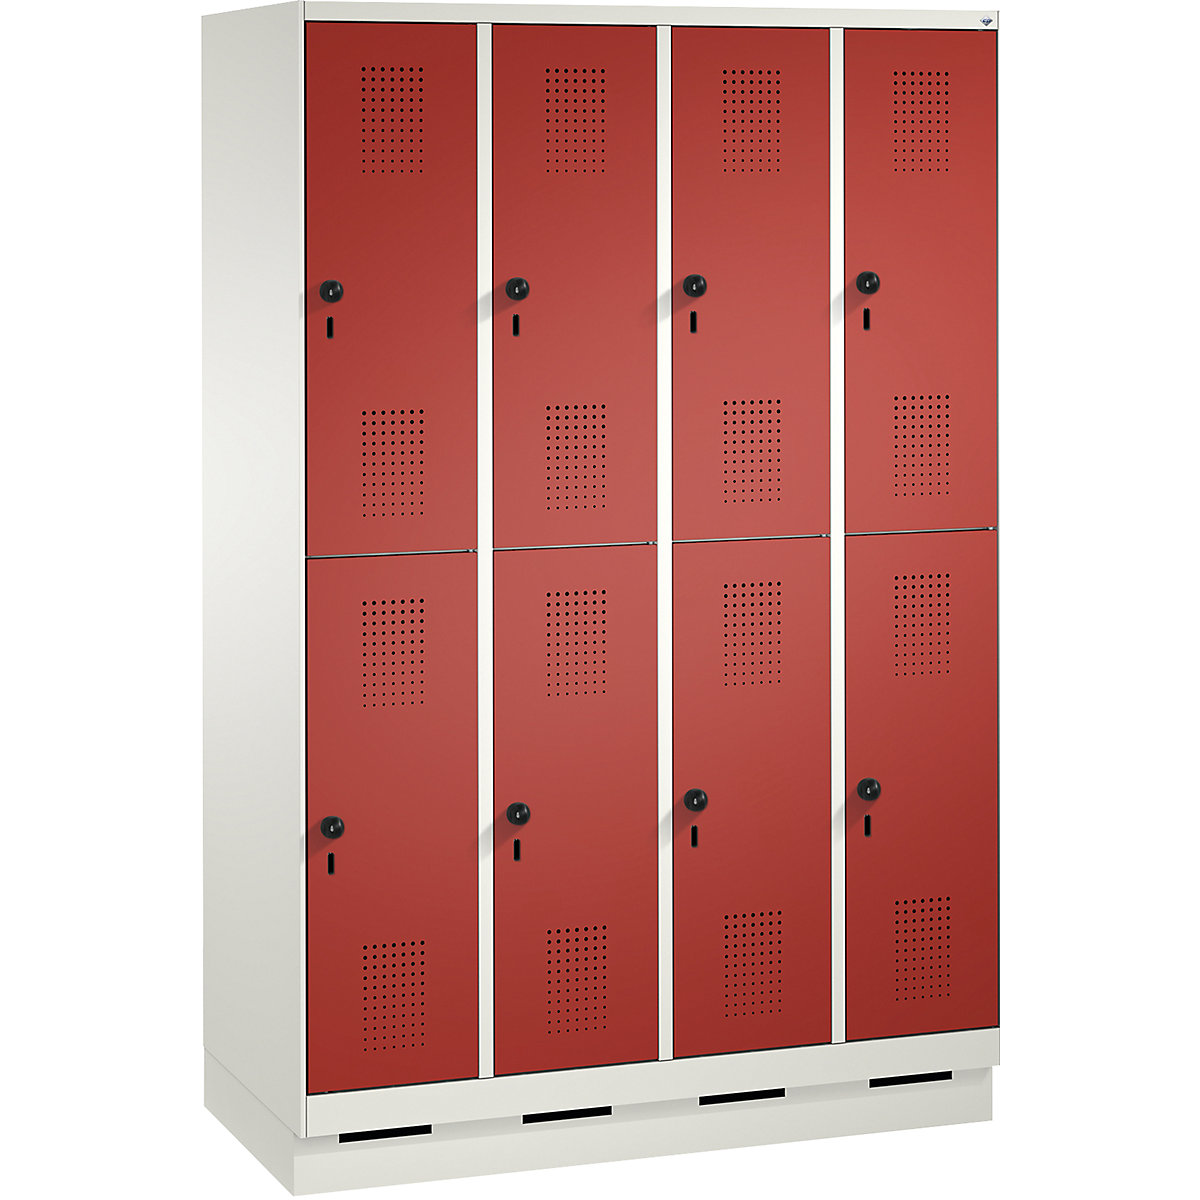 EVOLO cloakroom locker, double tier, with plinth – C+P, 4 compartments, 2 shelf compartments each, compartment width 300 mm, traffic white / flame red-7